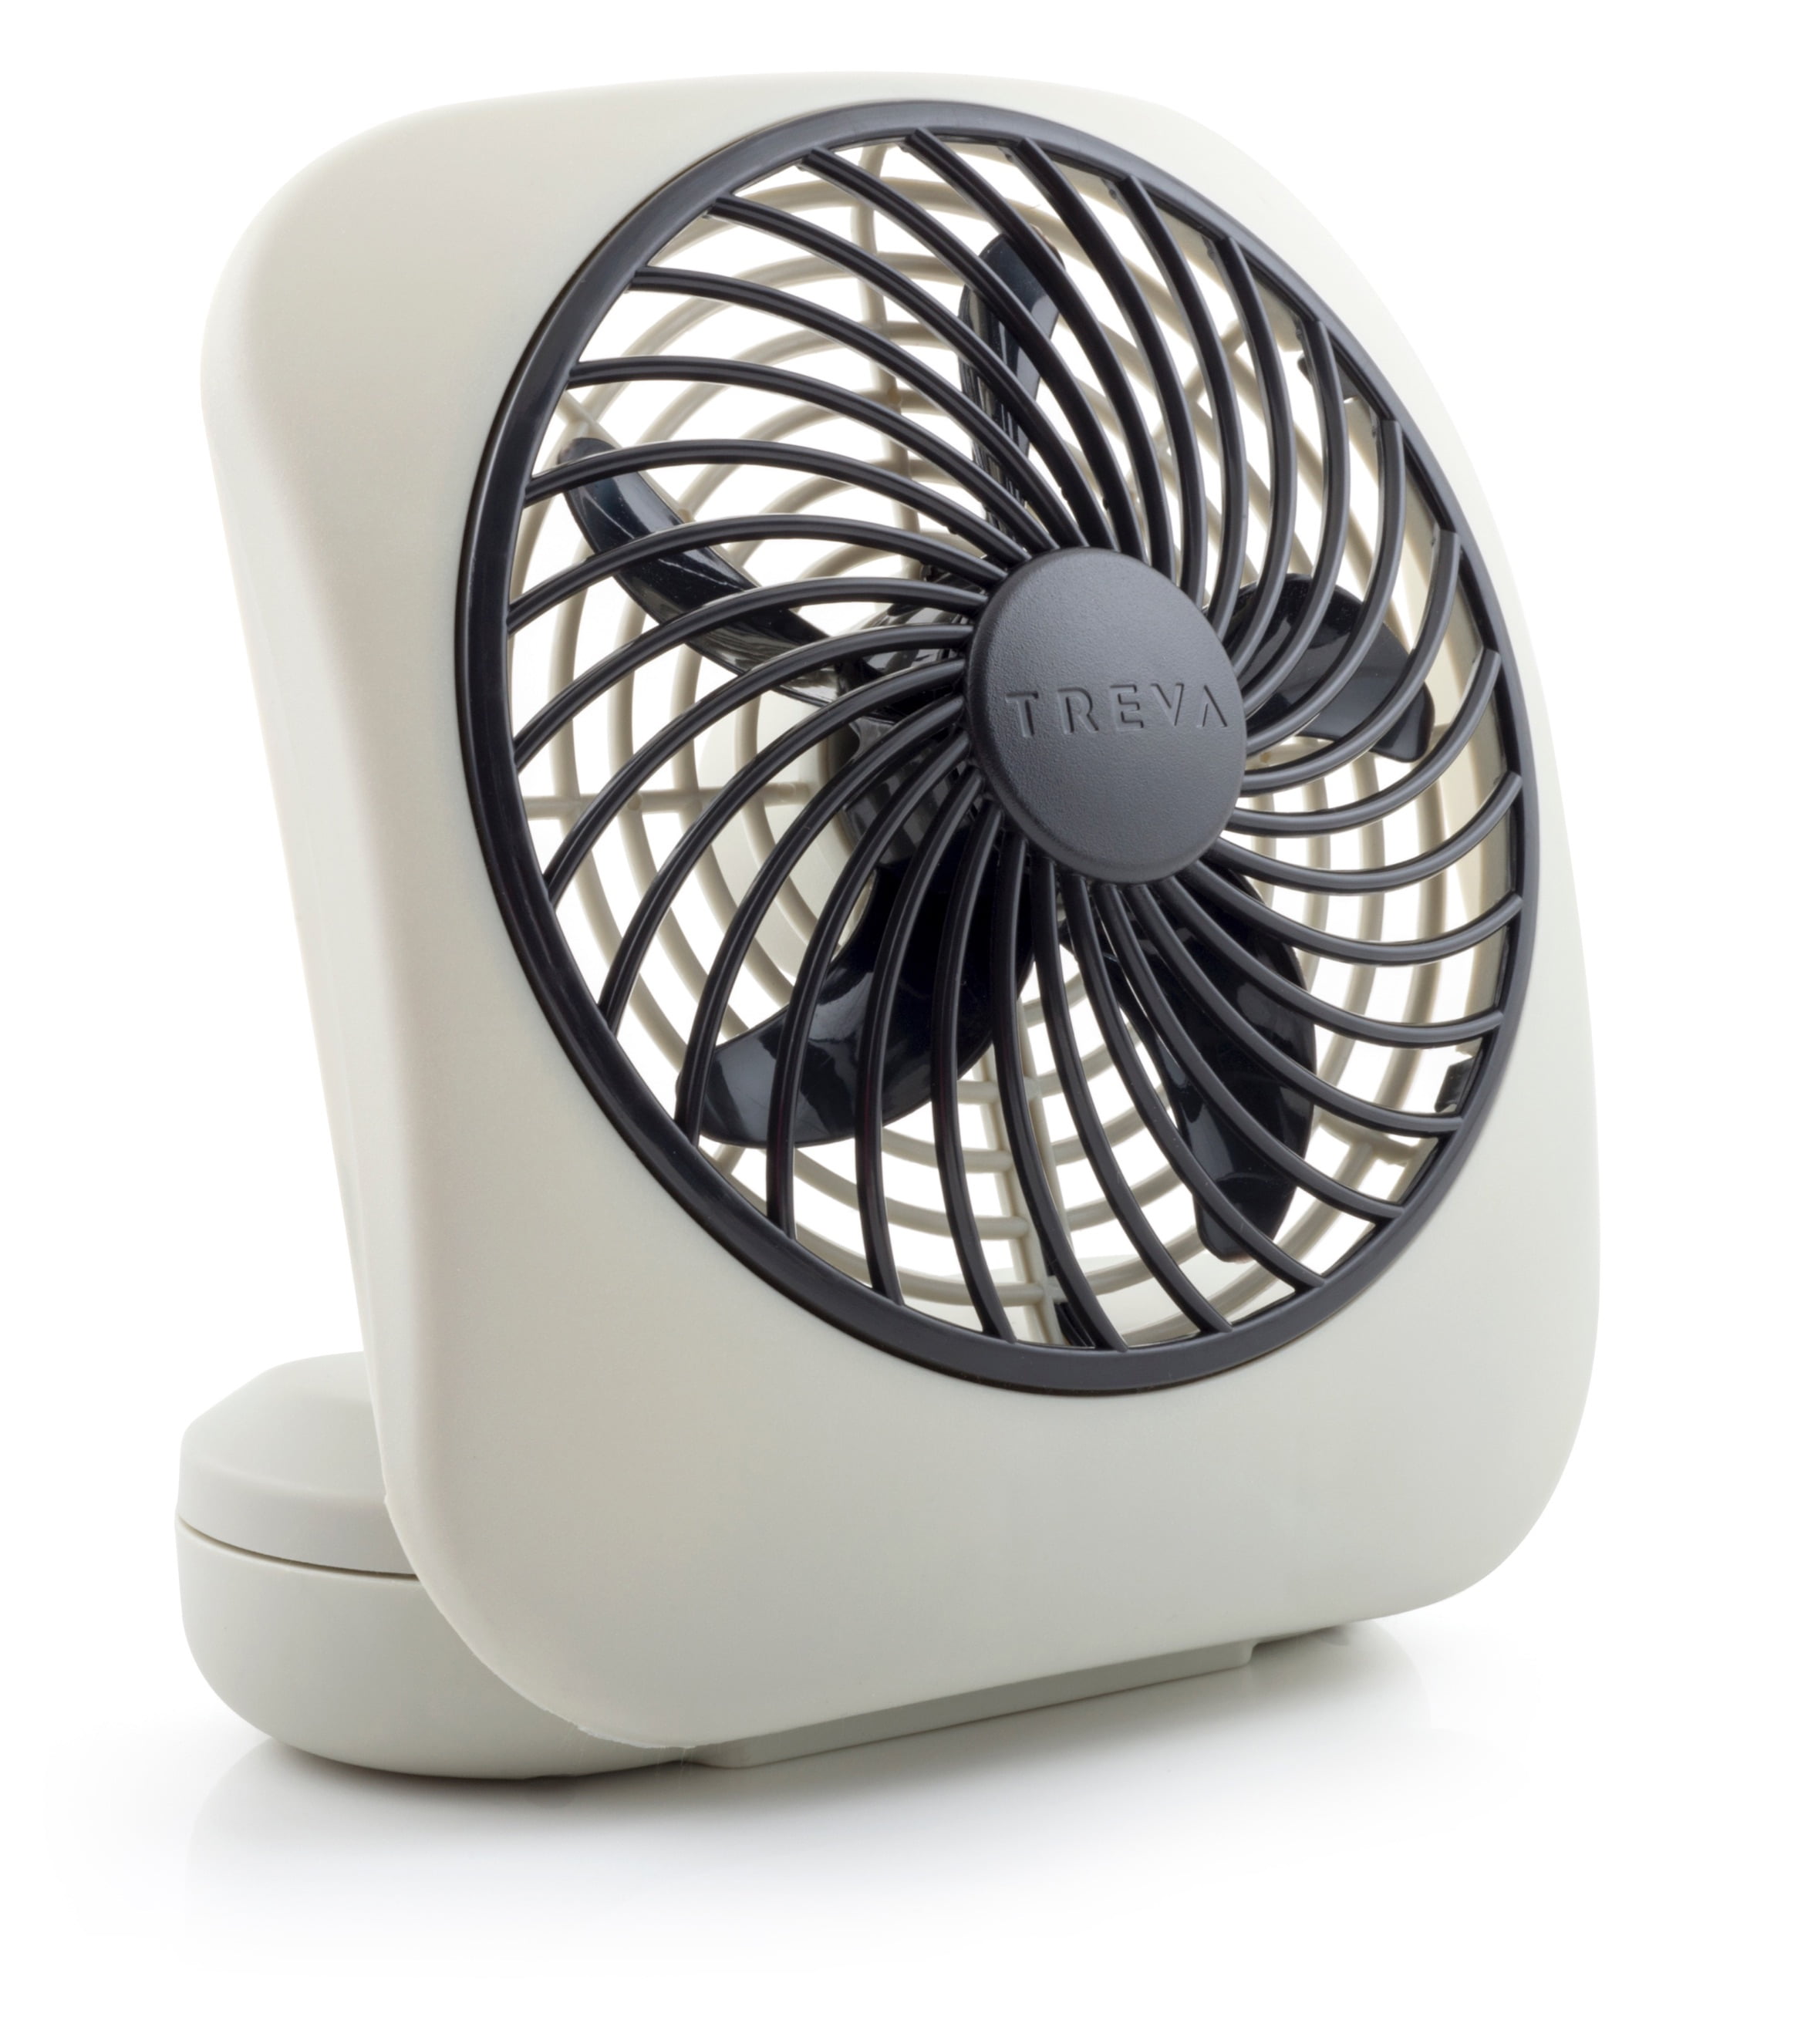 Mini Portable Super Battery Operated Dual-Motor 350 Rotating Fan Outdoor 